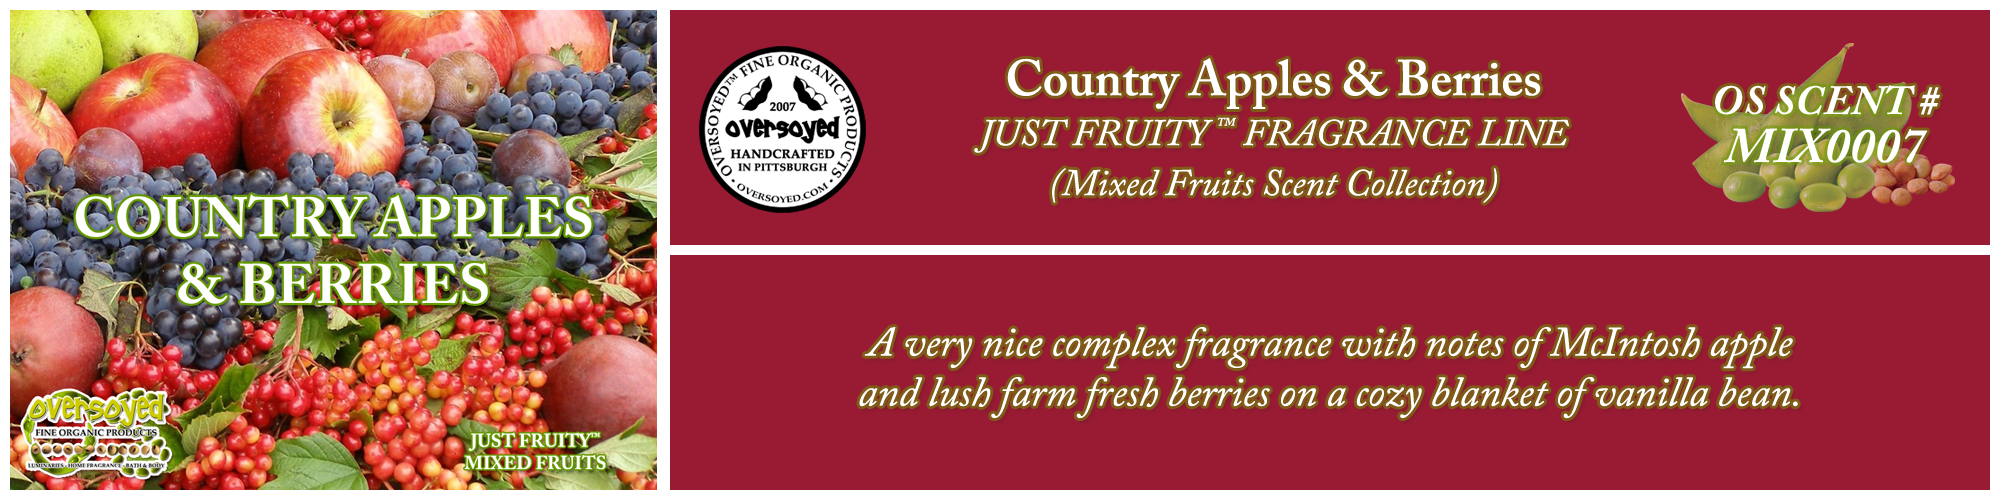 Country Apples & Berries Handcrafted Products Collection